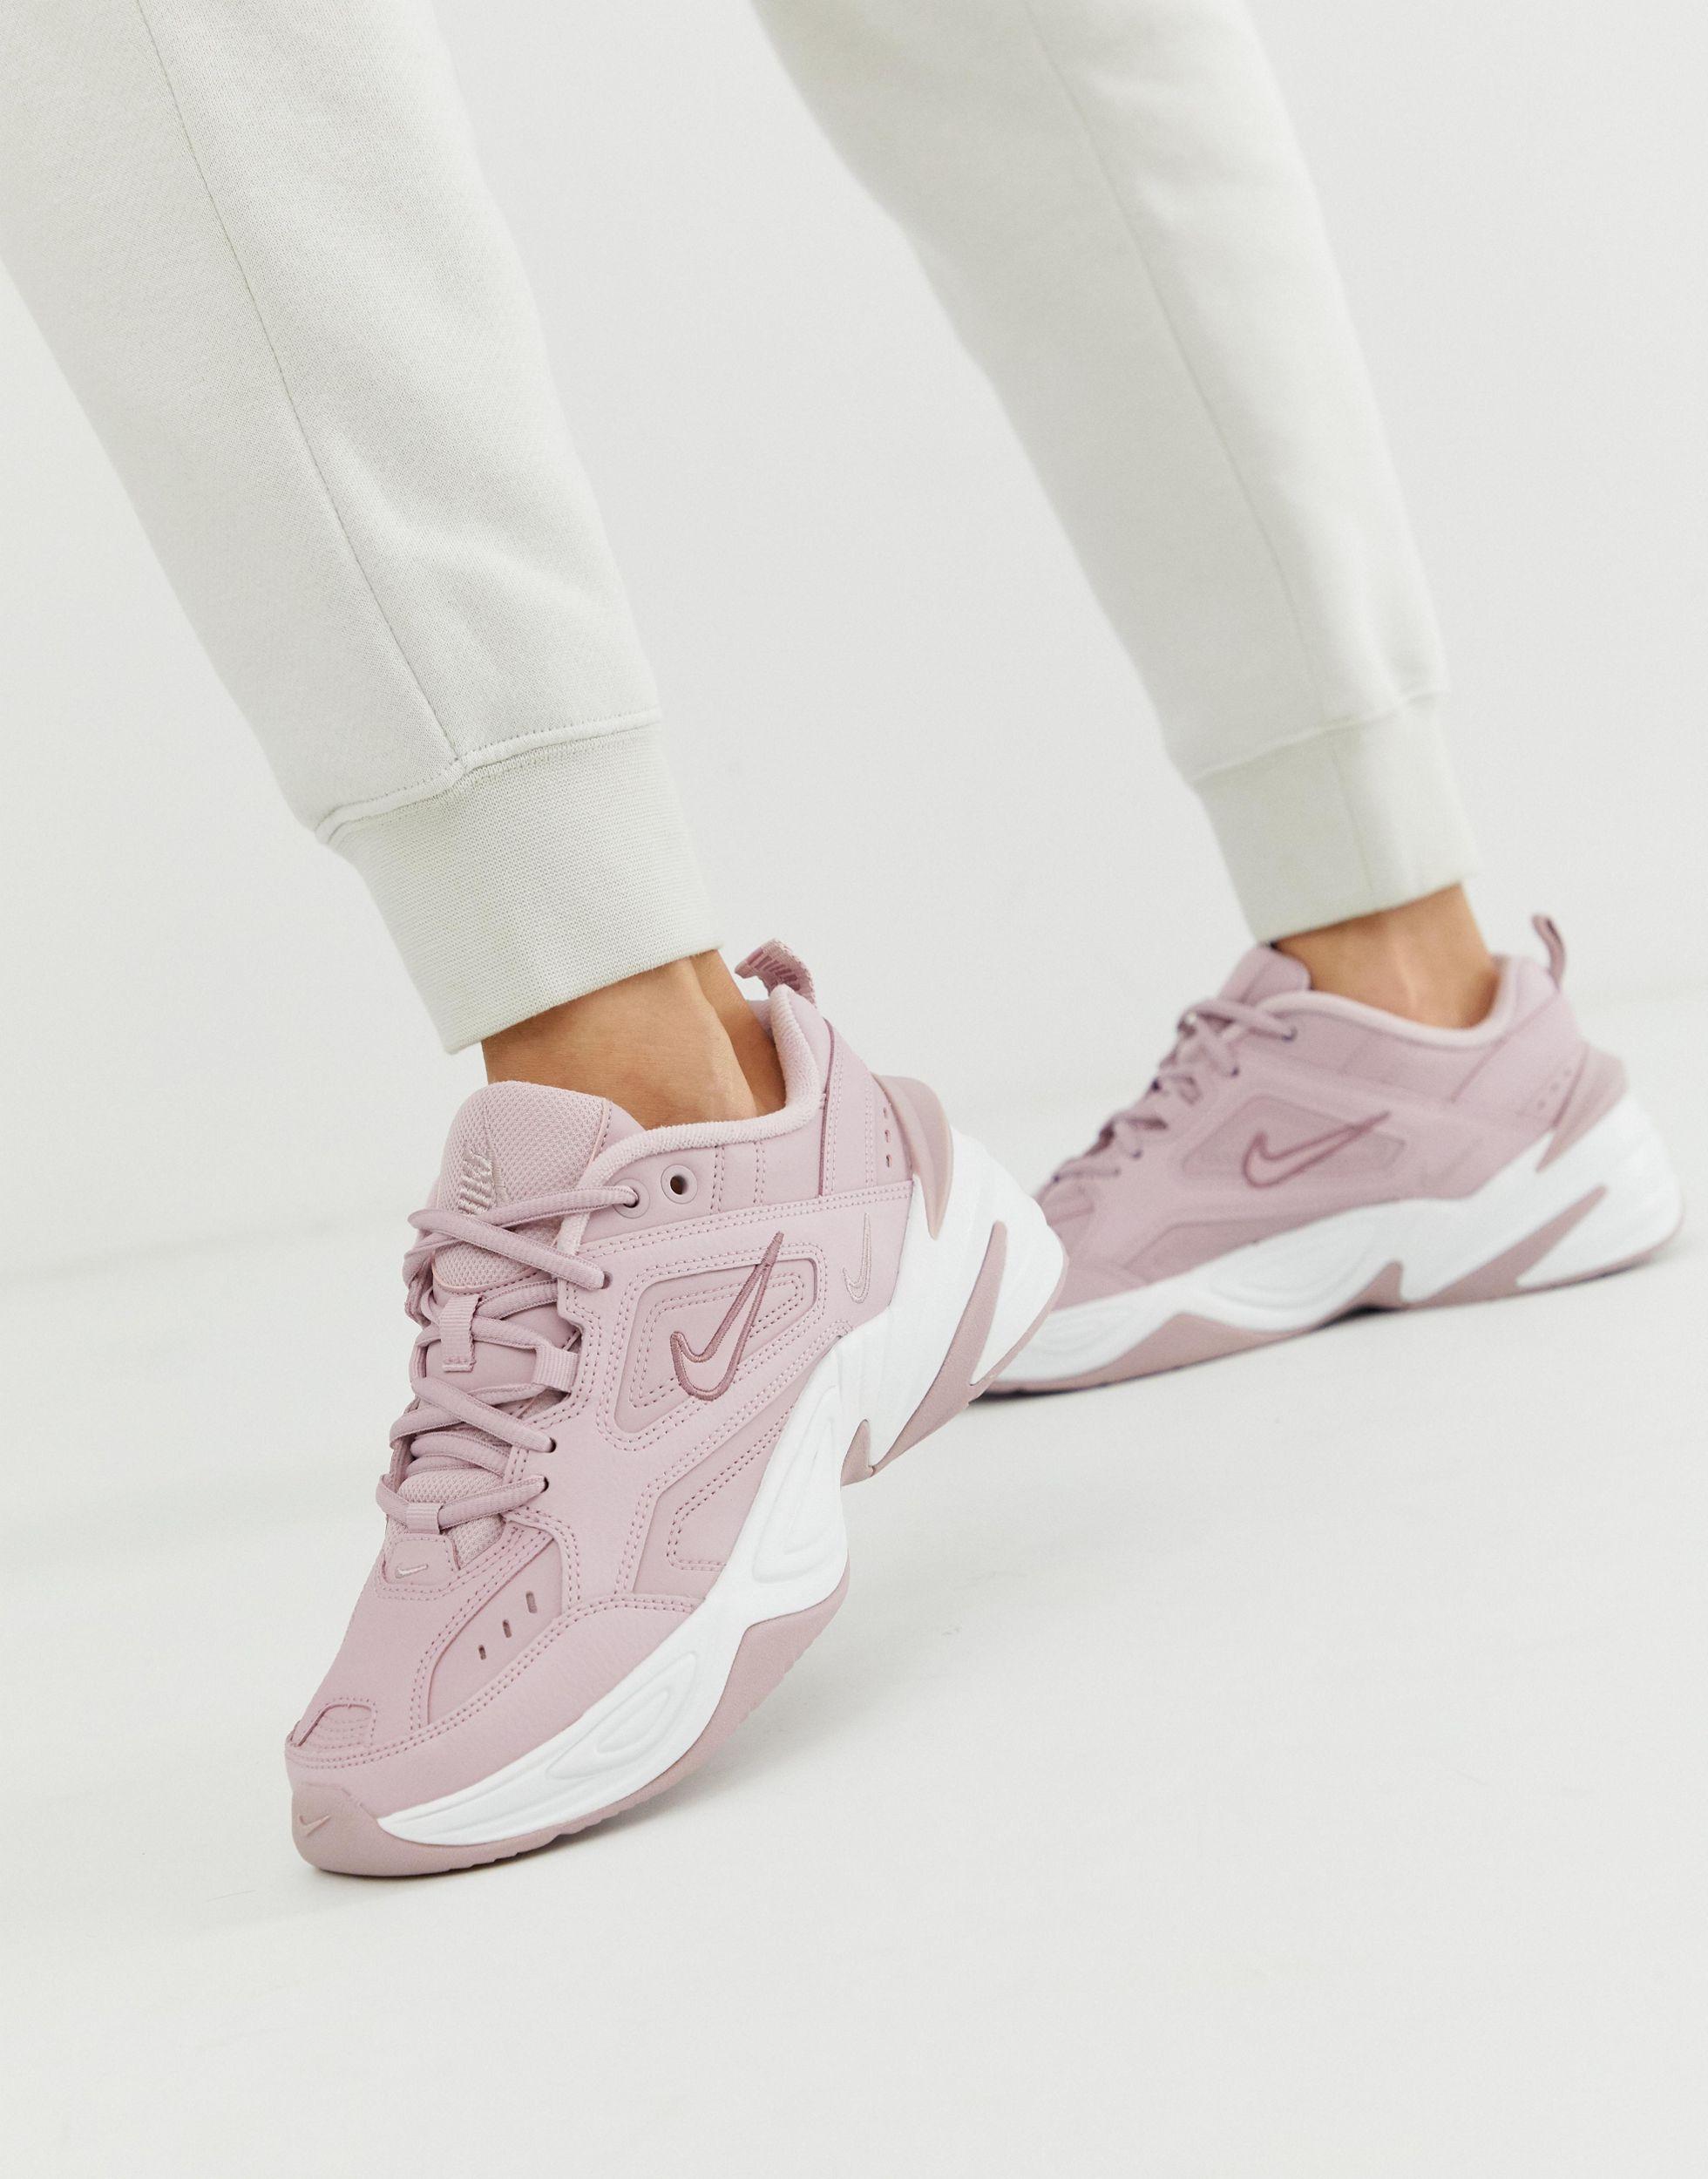 Nike Rubber M2k Tekno Trainers In Pink - Lyst